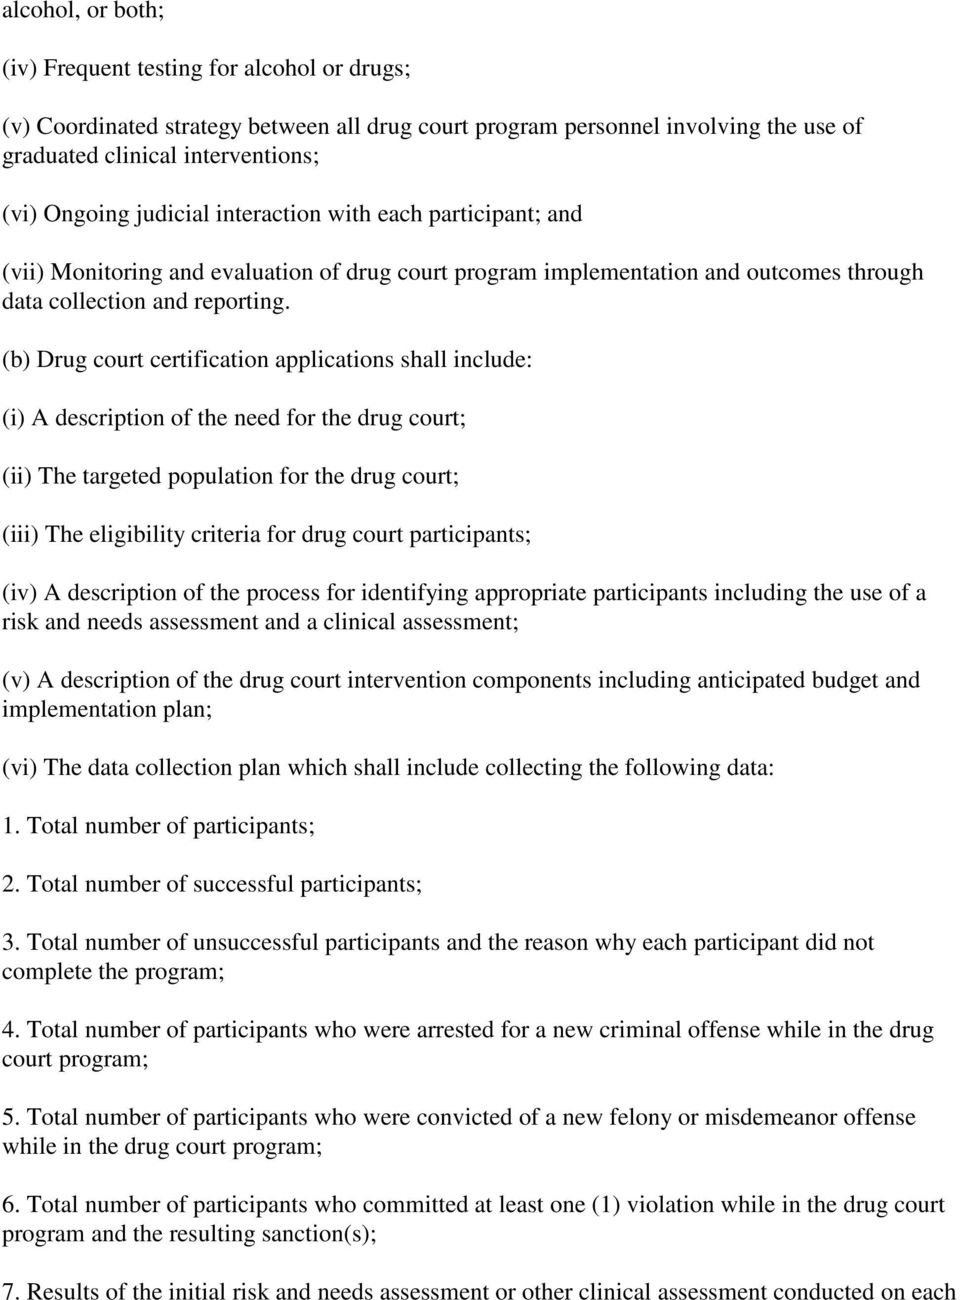 (b) Drug court certification applications shall include: (i) A description of the need for the drug court; (ii) The targeted population for the drug court; (iii) The eligibility criteria for drug